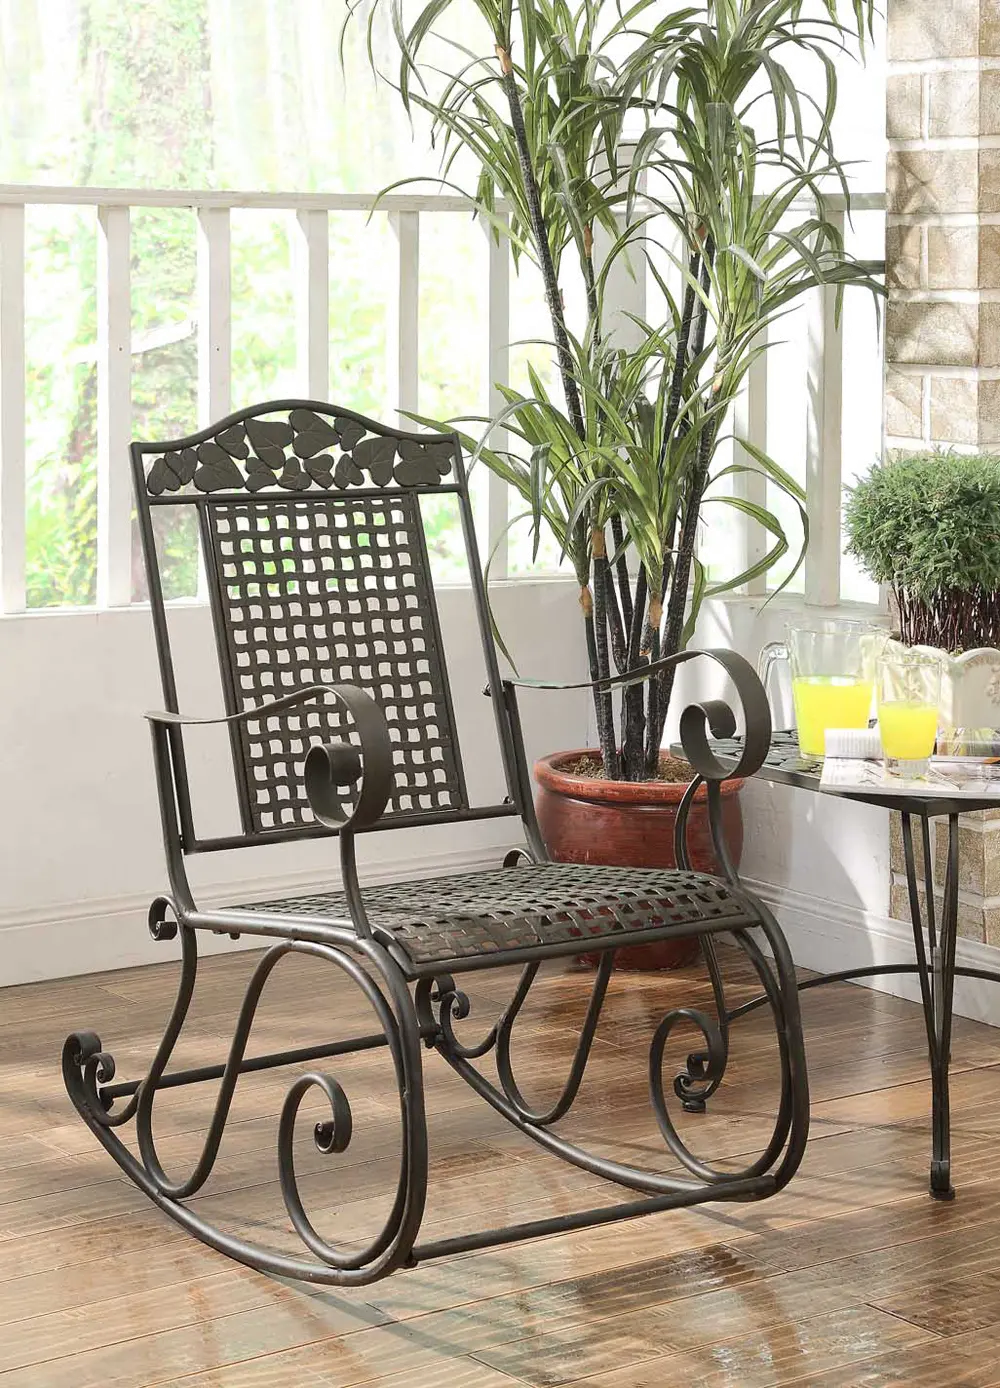 Metal Outdoor Patio Rocking Chair - Ivy League-1